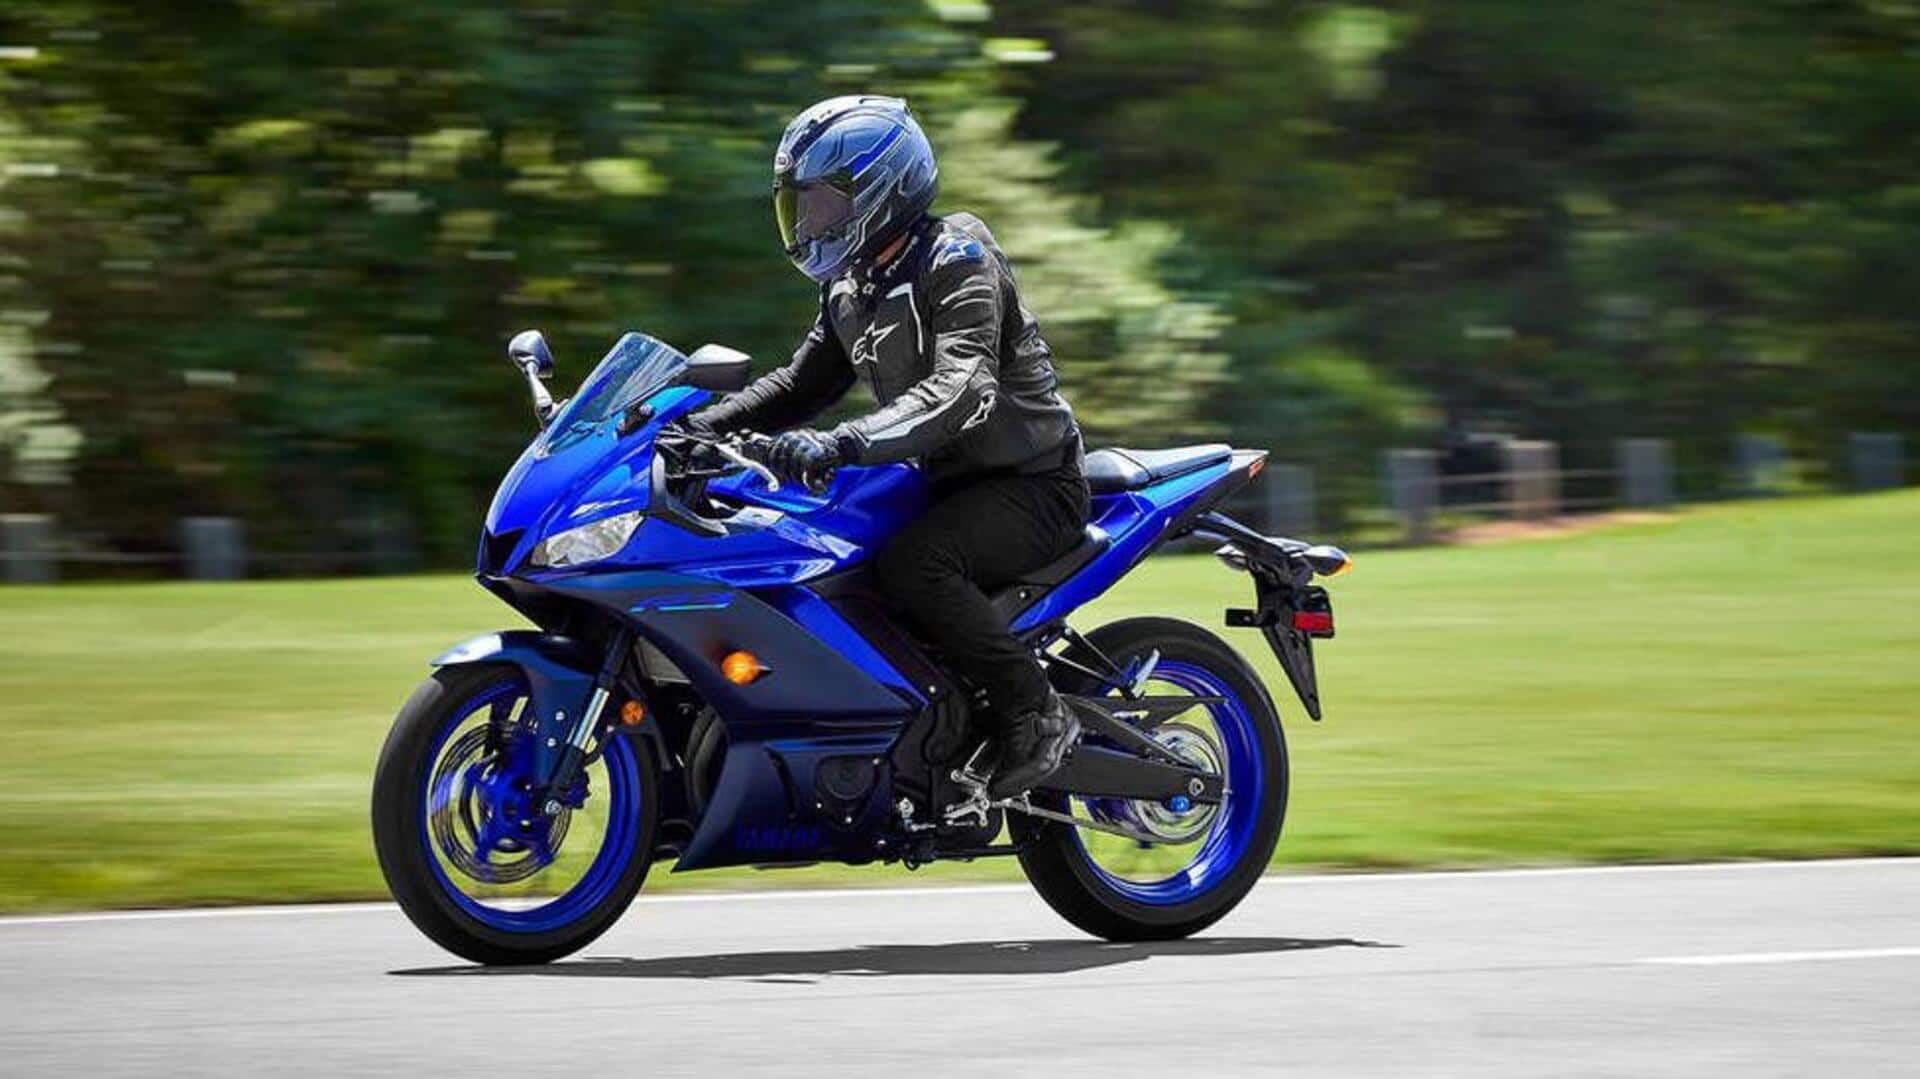 Yamaha YZF-R3 to arrive in India soon: Check top alternatives